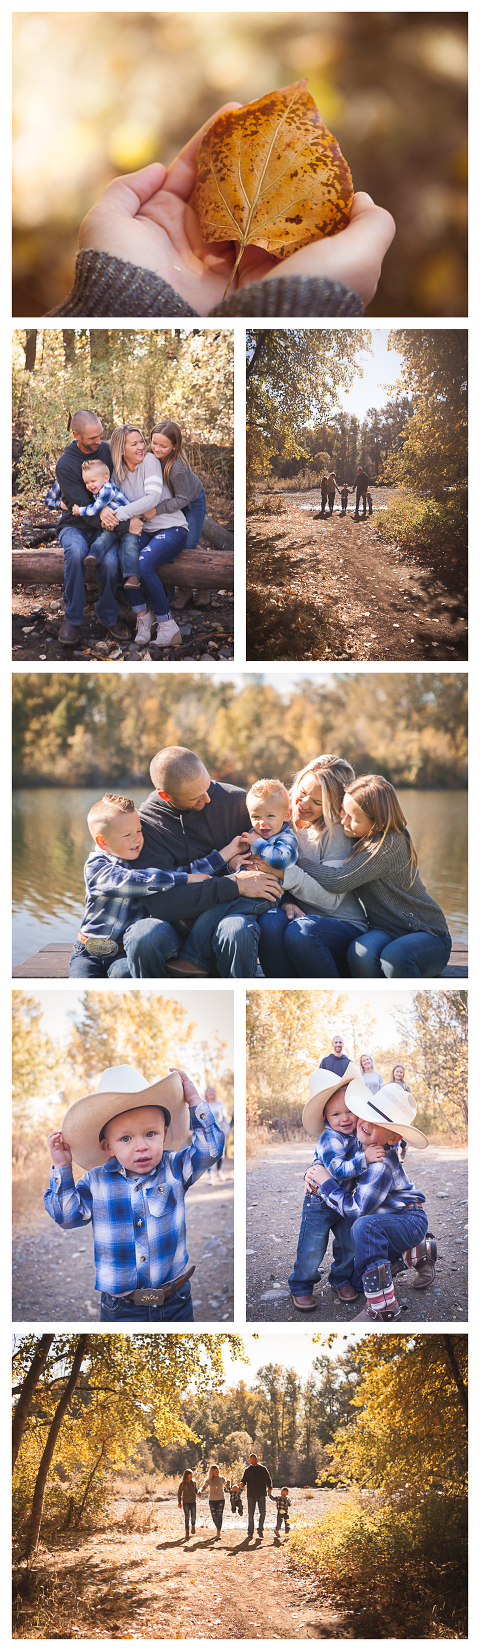 Anderson Family, Lifestyle session captured by Hailey Haberman, Ellensburg WA